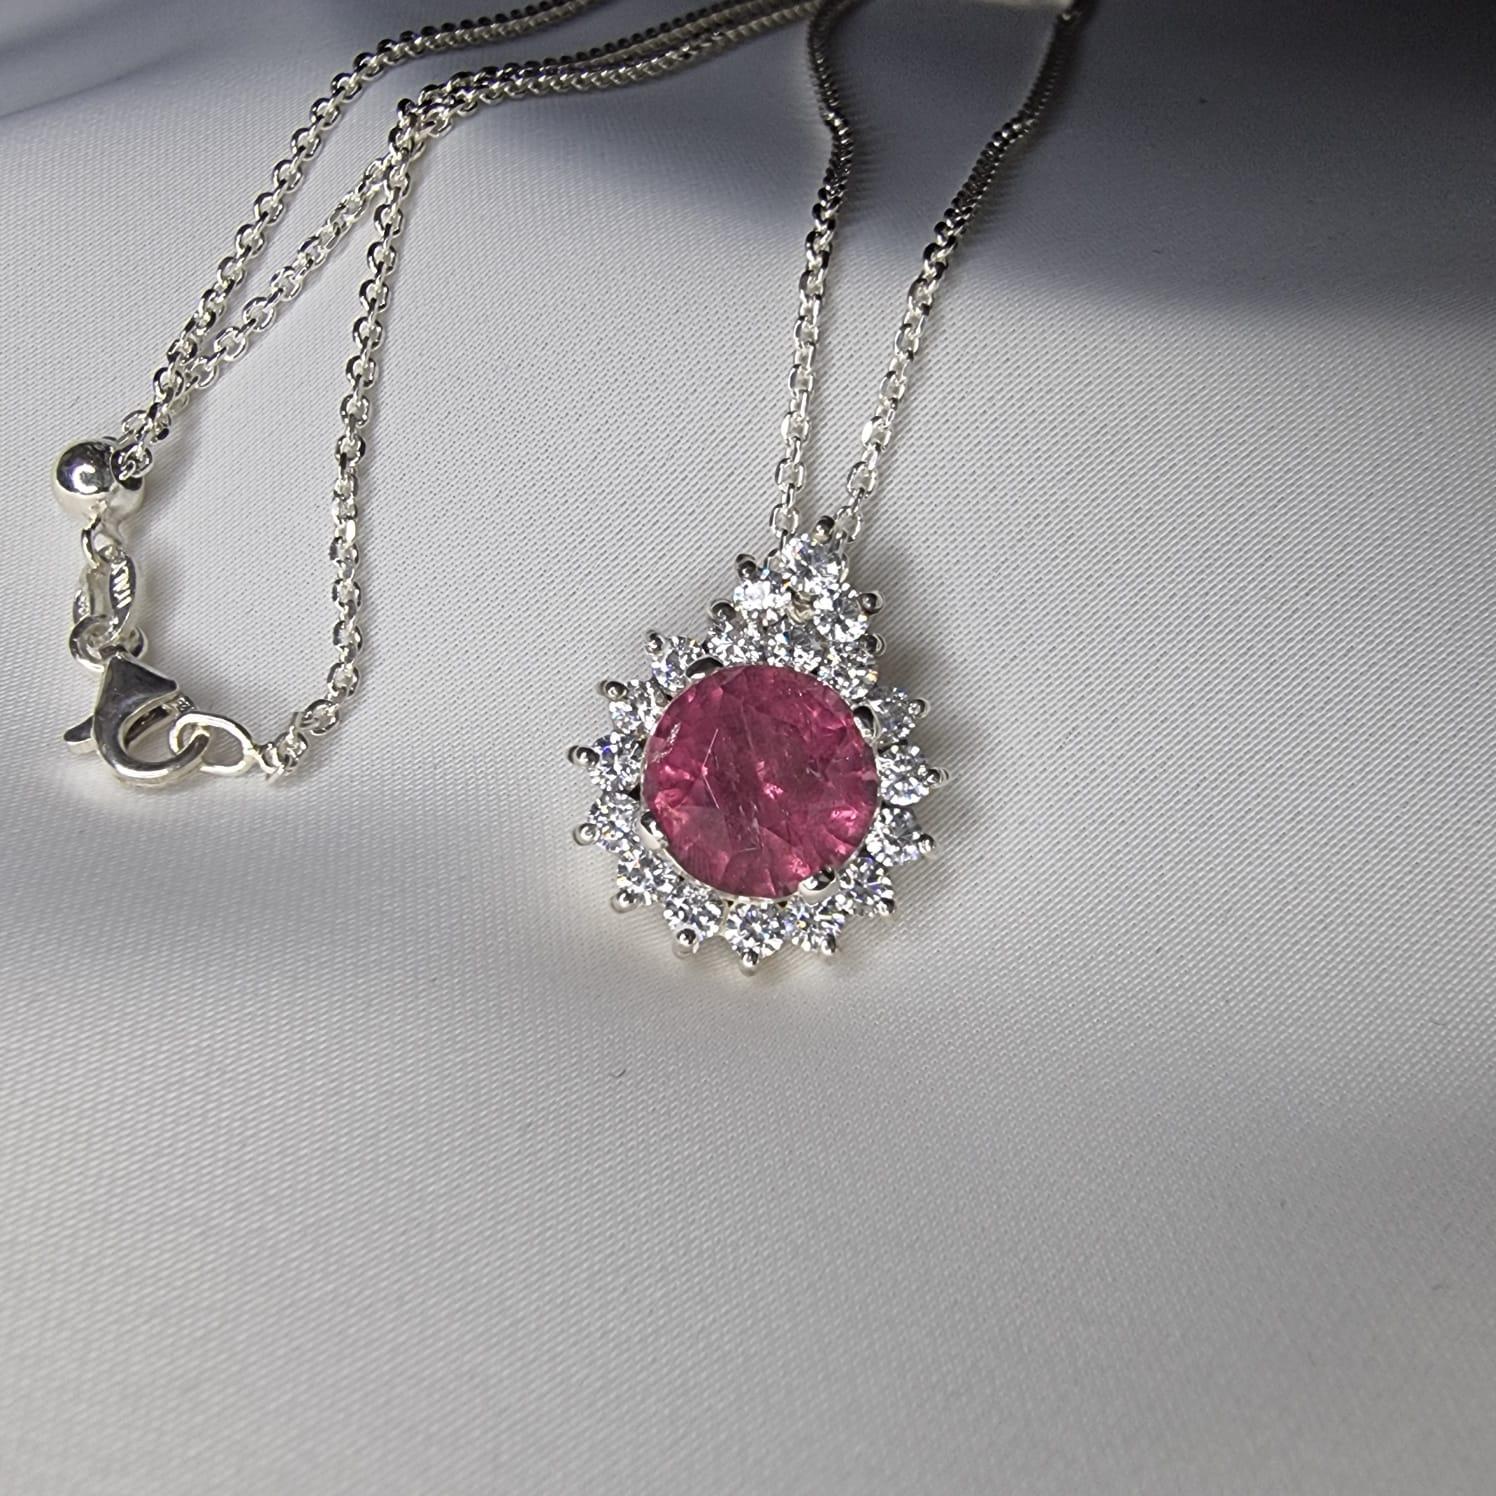 Introducing our exquisite 3ct Round Pink Natural Tourmaline Sterling Silver Pendant, a timeless piece that exudes elegance and sophistication. This stunning pendant features a captivating 3-carat round-cut pink tourmaline, known for its vibrant hue